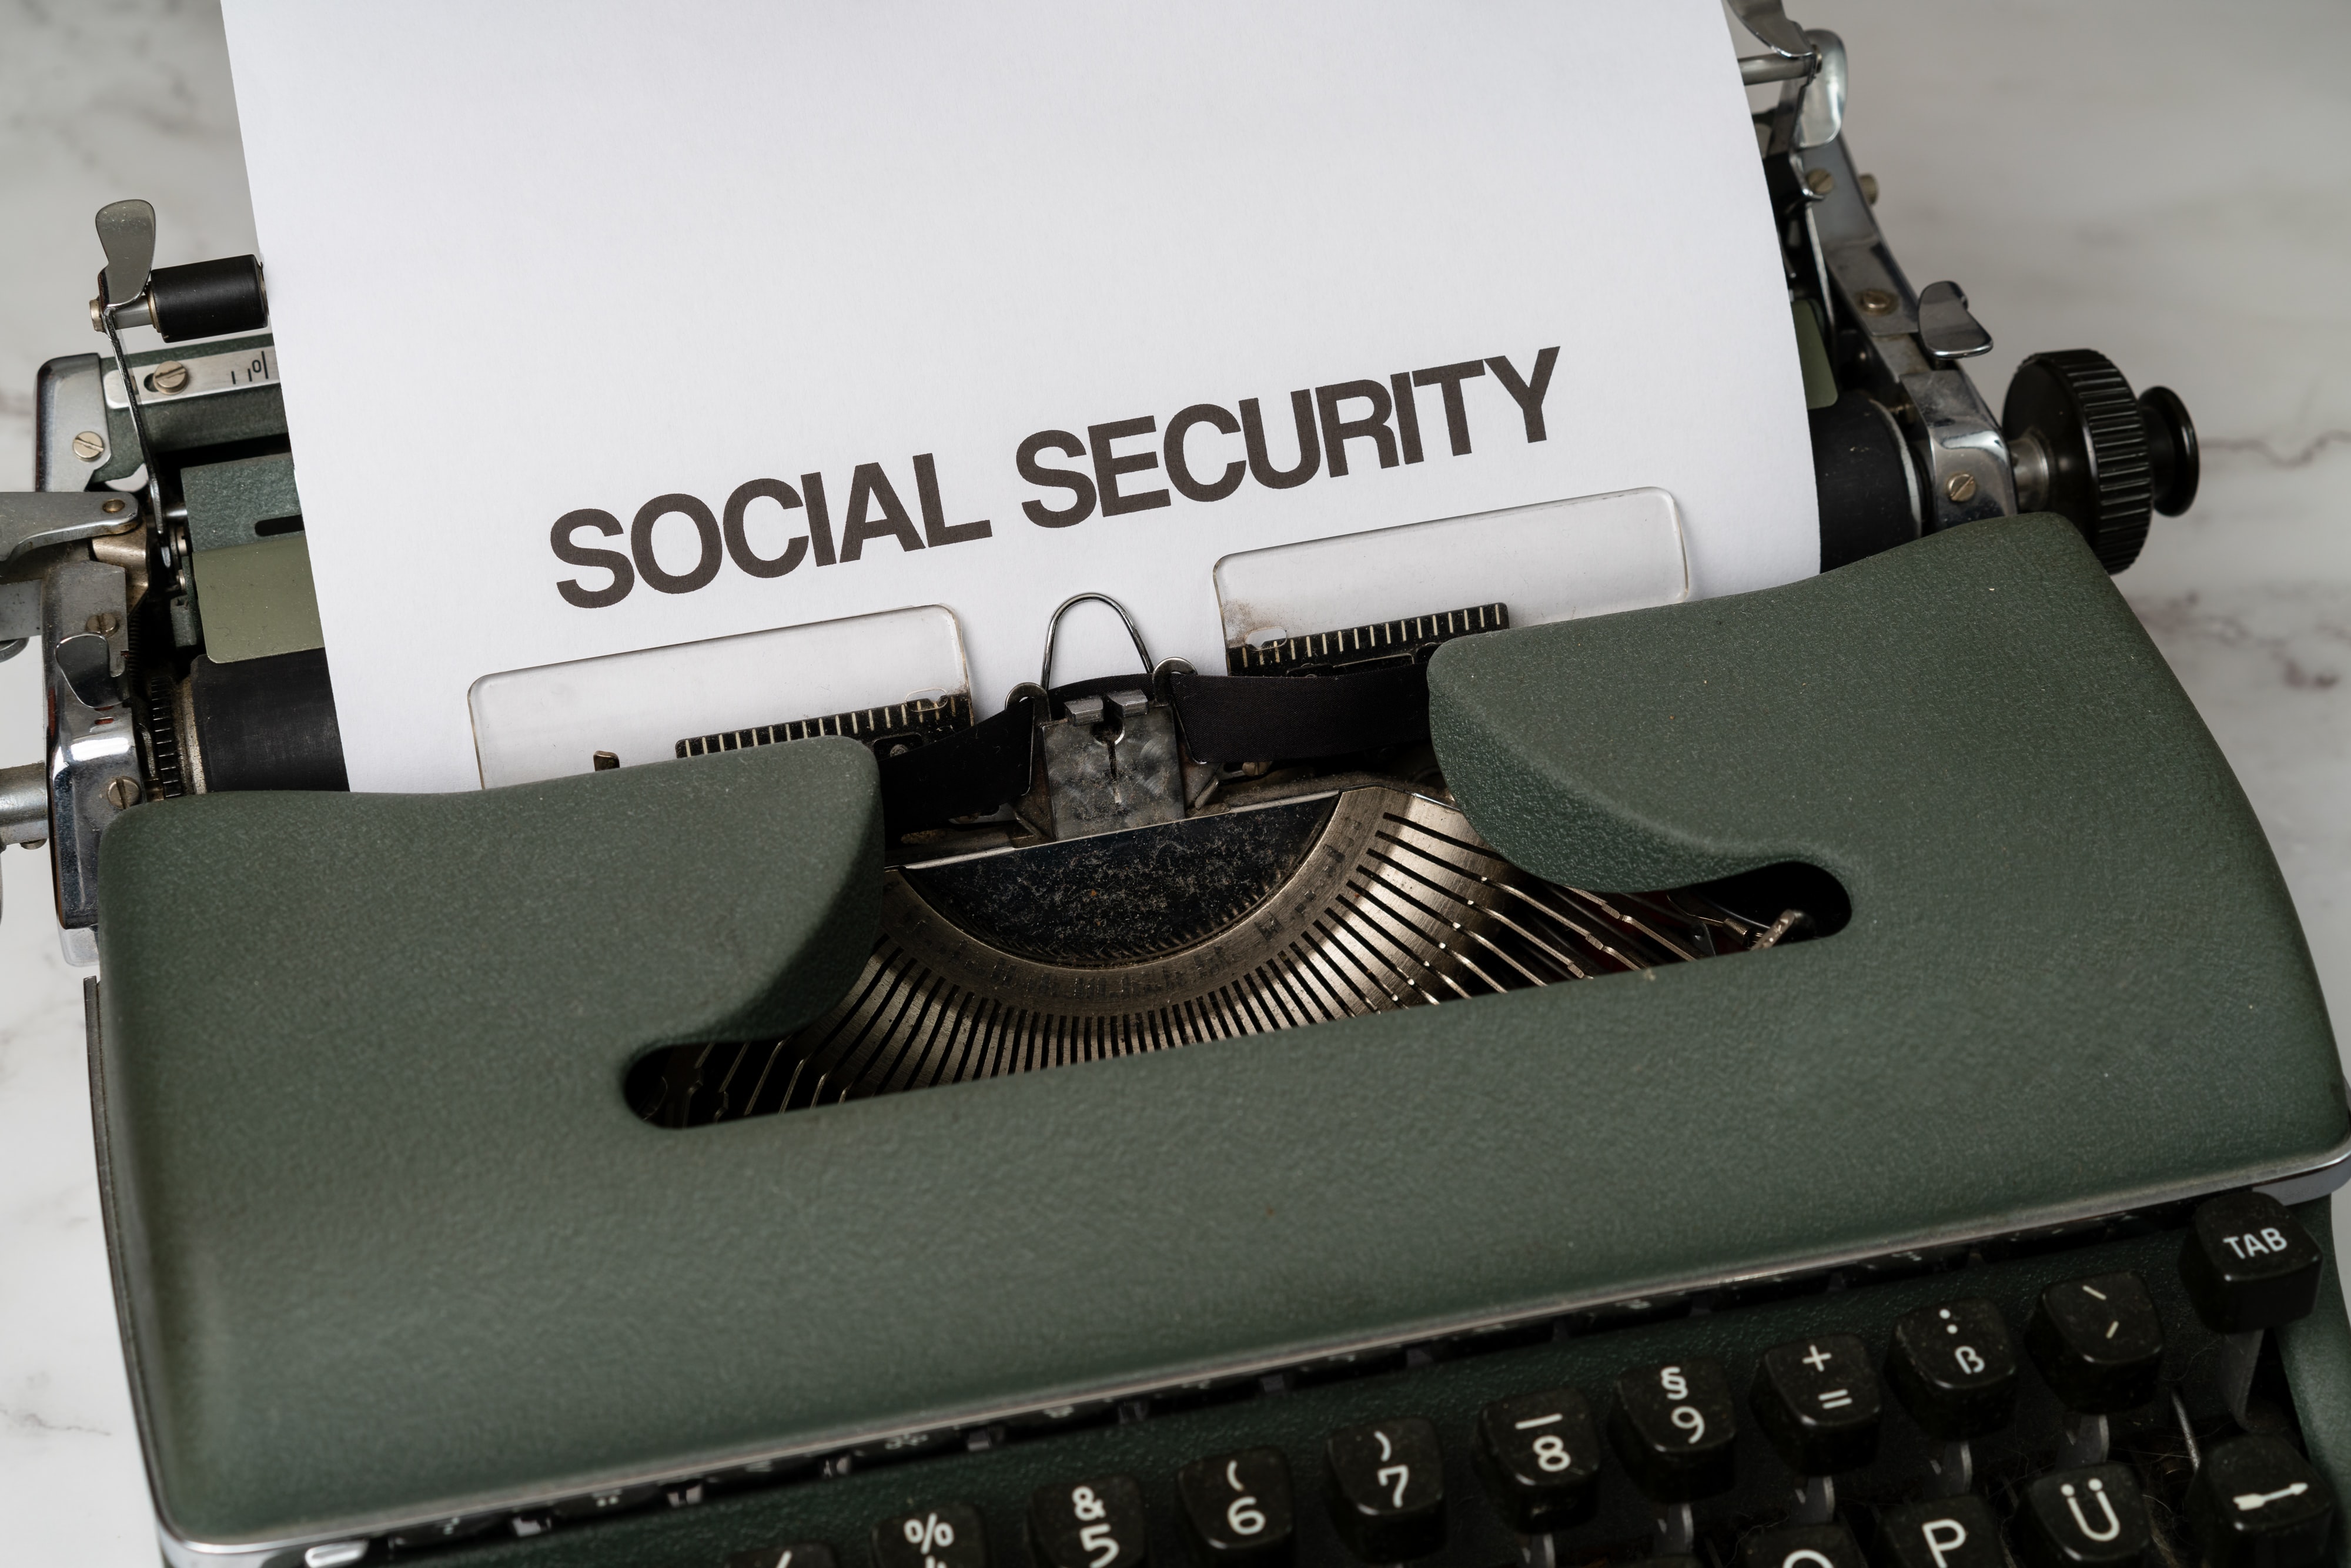 A typewriter has a page inserted with the words "Social Security" across the top.